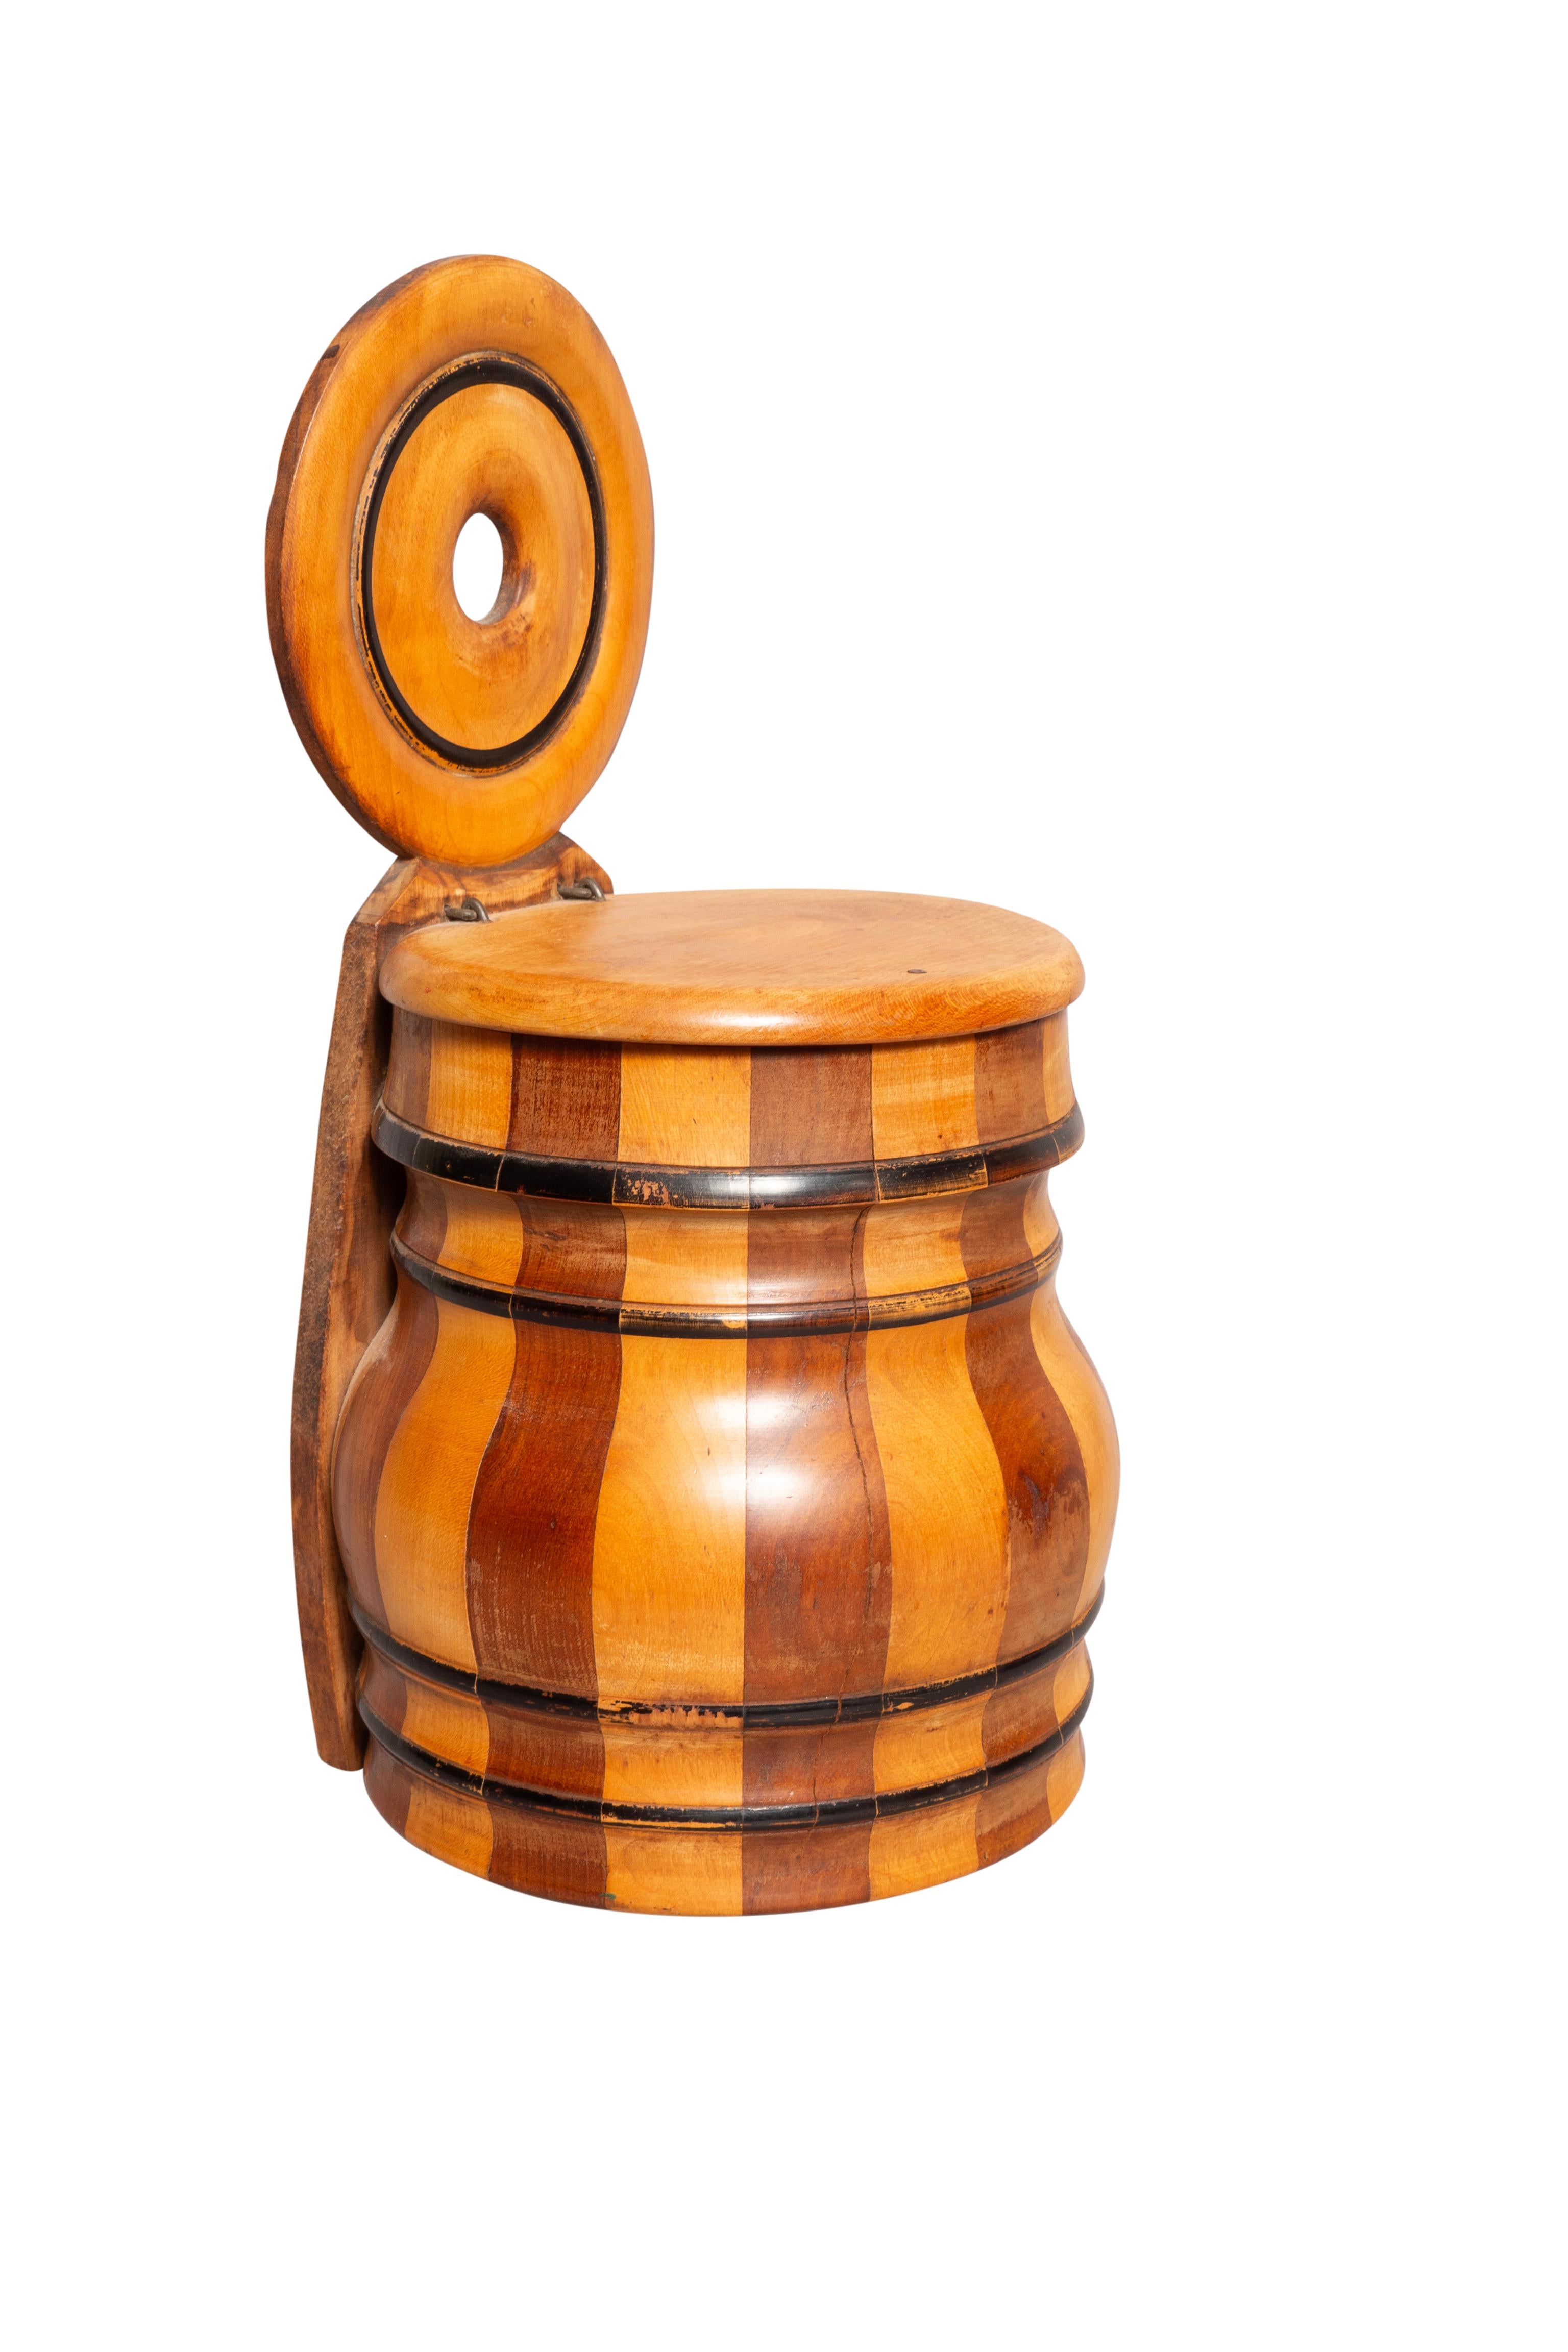 Meant to hang on a wall. Barrel shape with alternating woods. Lift lid and cutout back to hang on a wall. Commonly referred to as treen ware.